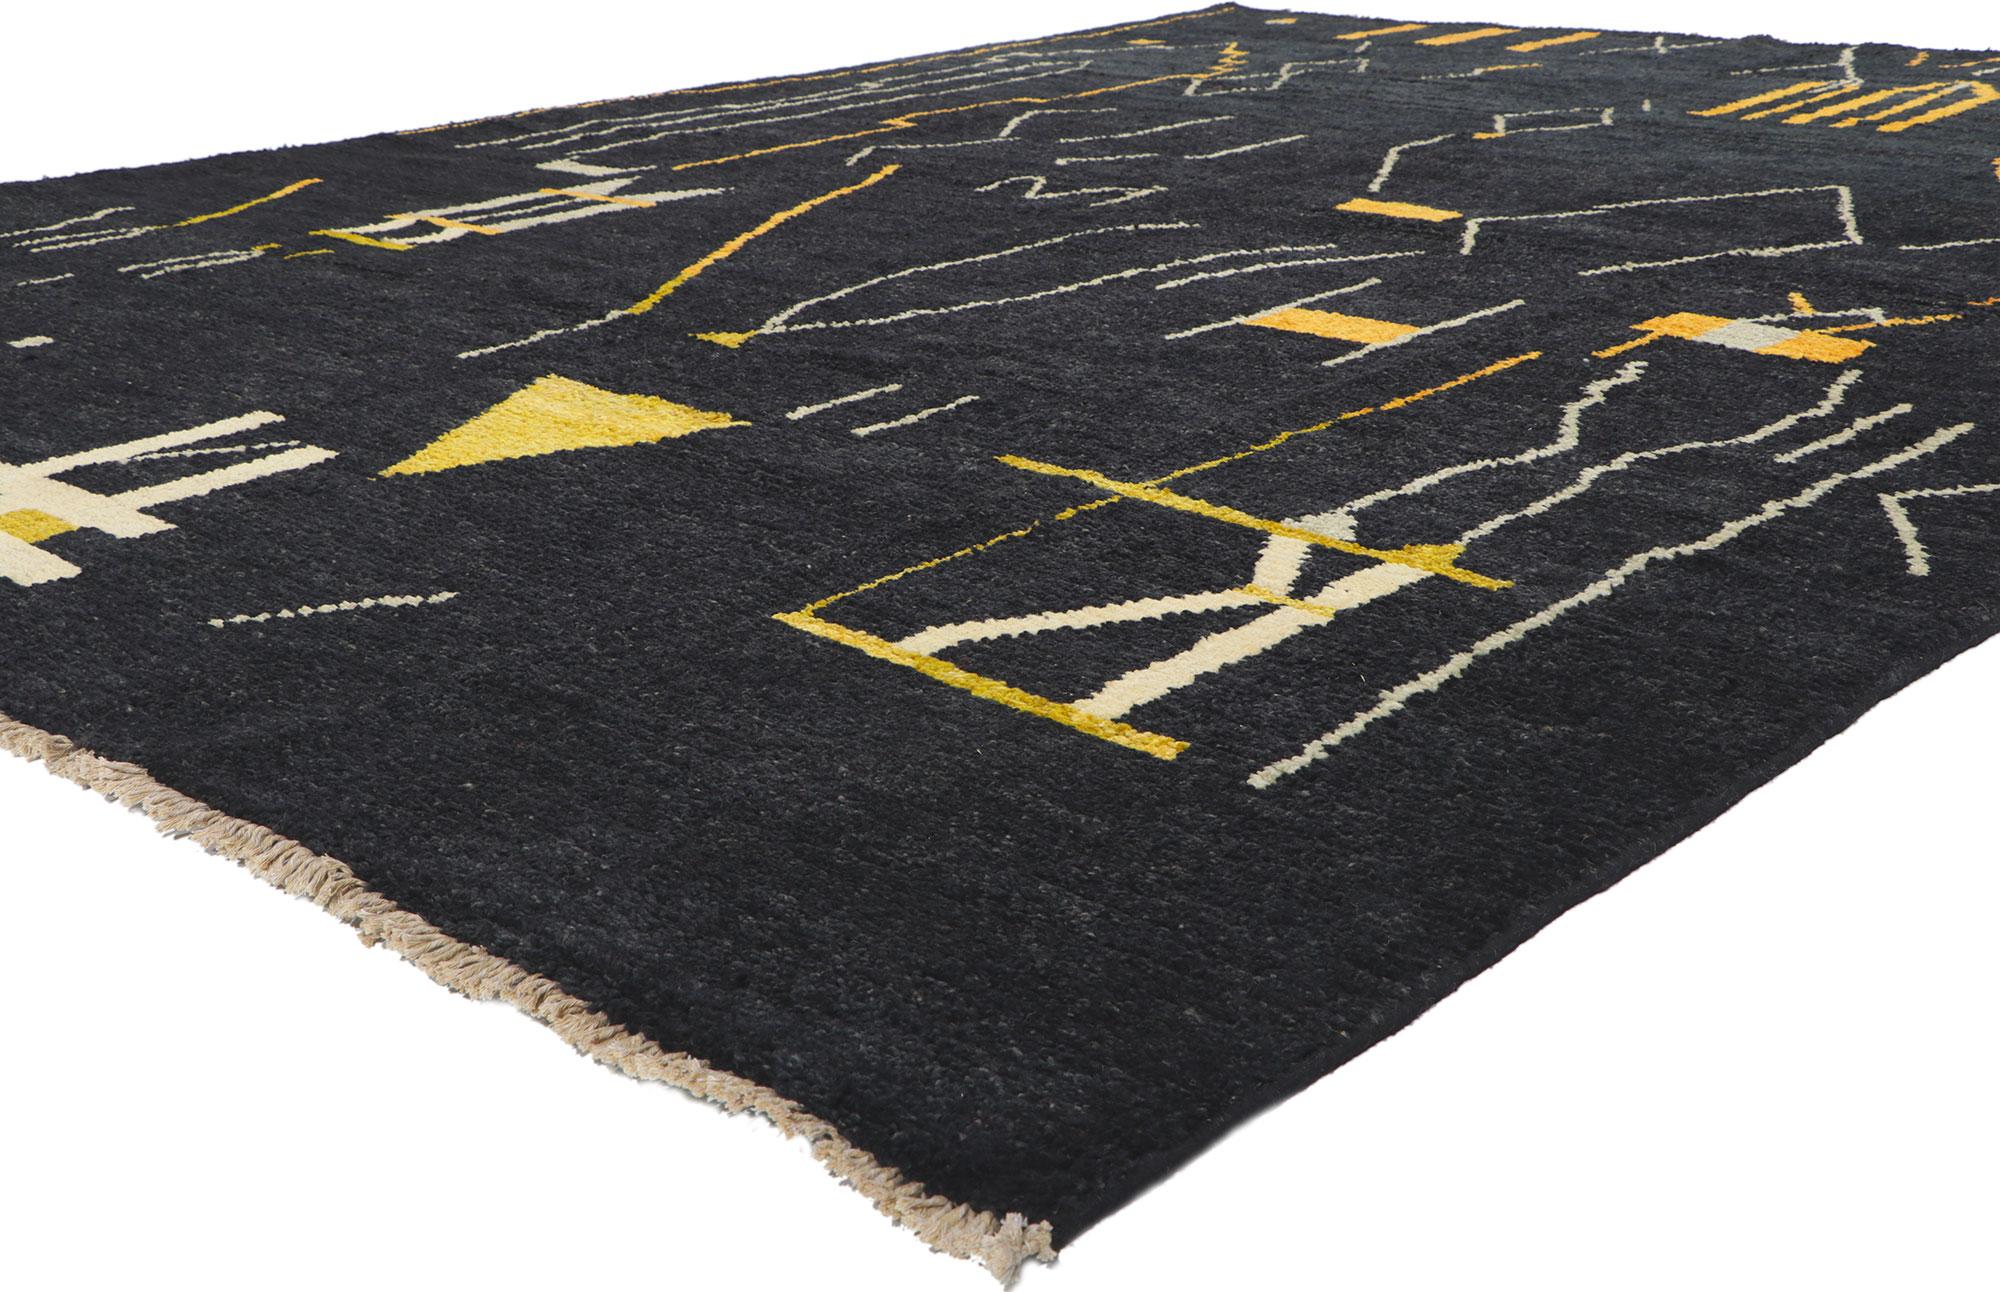 ​80707 New Contemporary Moroccan Rug with Tribal Style 09'05 x 12'09.​ Showcasing an expressive tribal design, incredible detail and texture, this hand knotted wool contemporary Moroccan area rug is a captivating vision of woven beauty. The bold